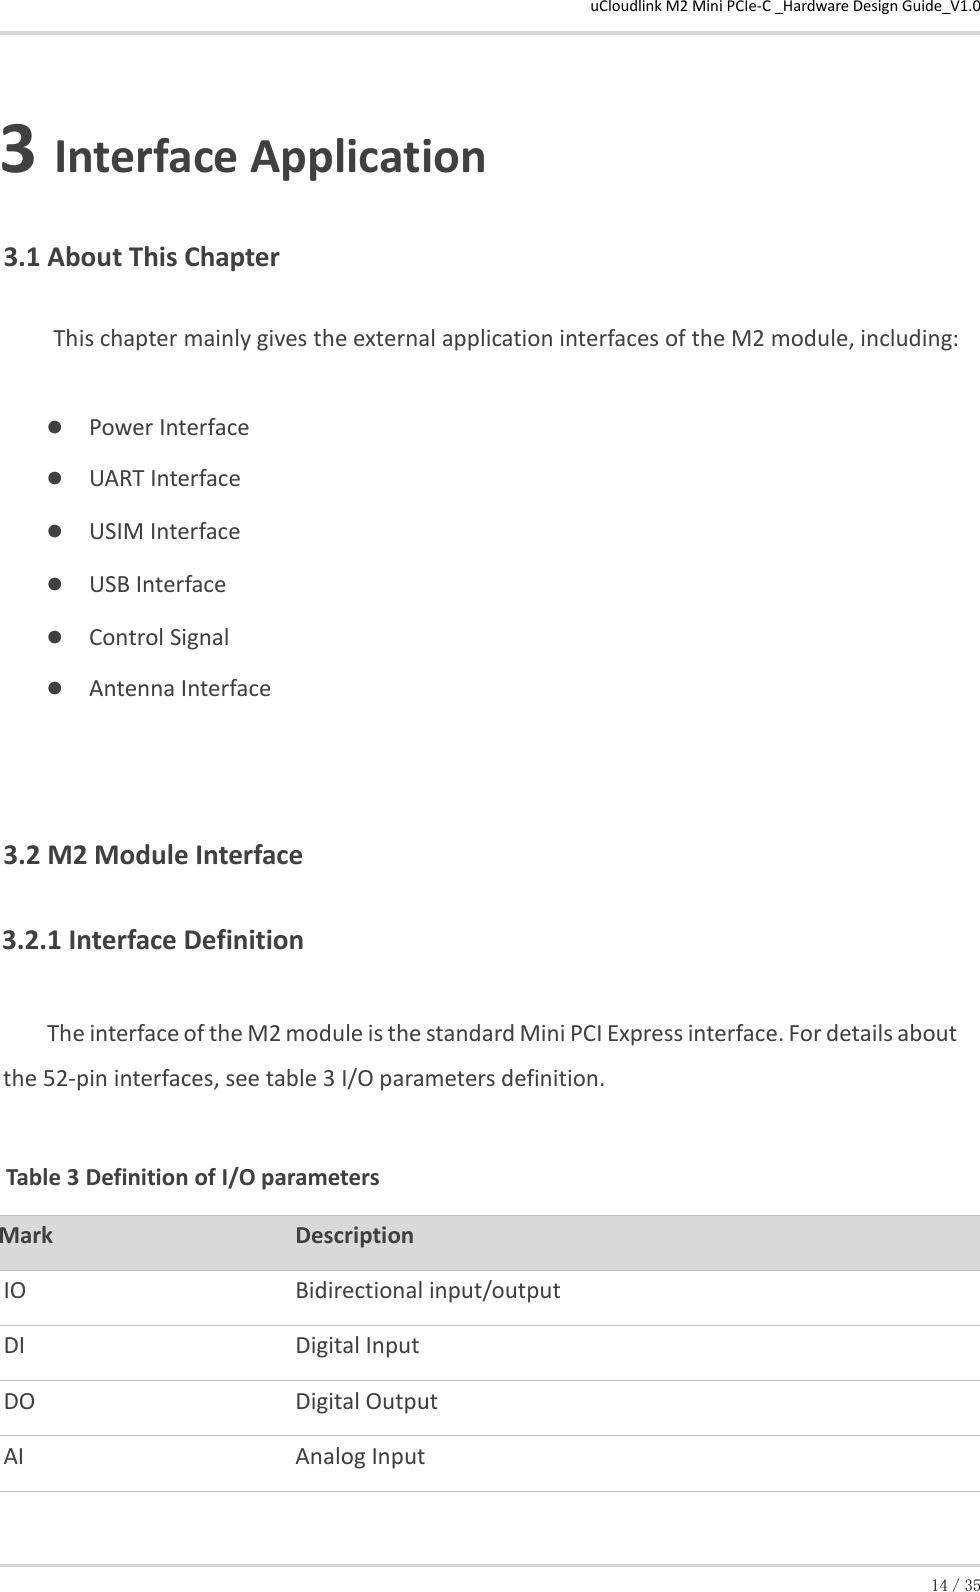 uCloudlink M2 Mini PCIe-C _Hardware Design Guide_V1.0 14／35  3 Interface Application 3.1 About This Chapter          This chapter mainly gives the external application interfaces of the M2 module, including:  Power Interface  UART Interface  USIM Interface  USB Interface  Control Signal  Antenna Interface 3.2 M2 Module Interface 3.2.1 Interface Definition  The interface of the M2 module is the standard Mini PCI Express interface. For details about the 52-pin interfaces, see table 3 I/O parameters definition.  Table 3 Definition of I/O parameters  Mark Description  IO  Bidirectional input/output DI  Digital Input DO  Digital Output AI  Analog Input 